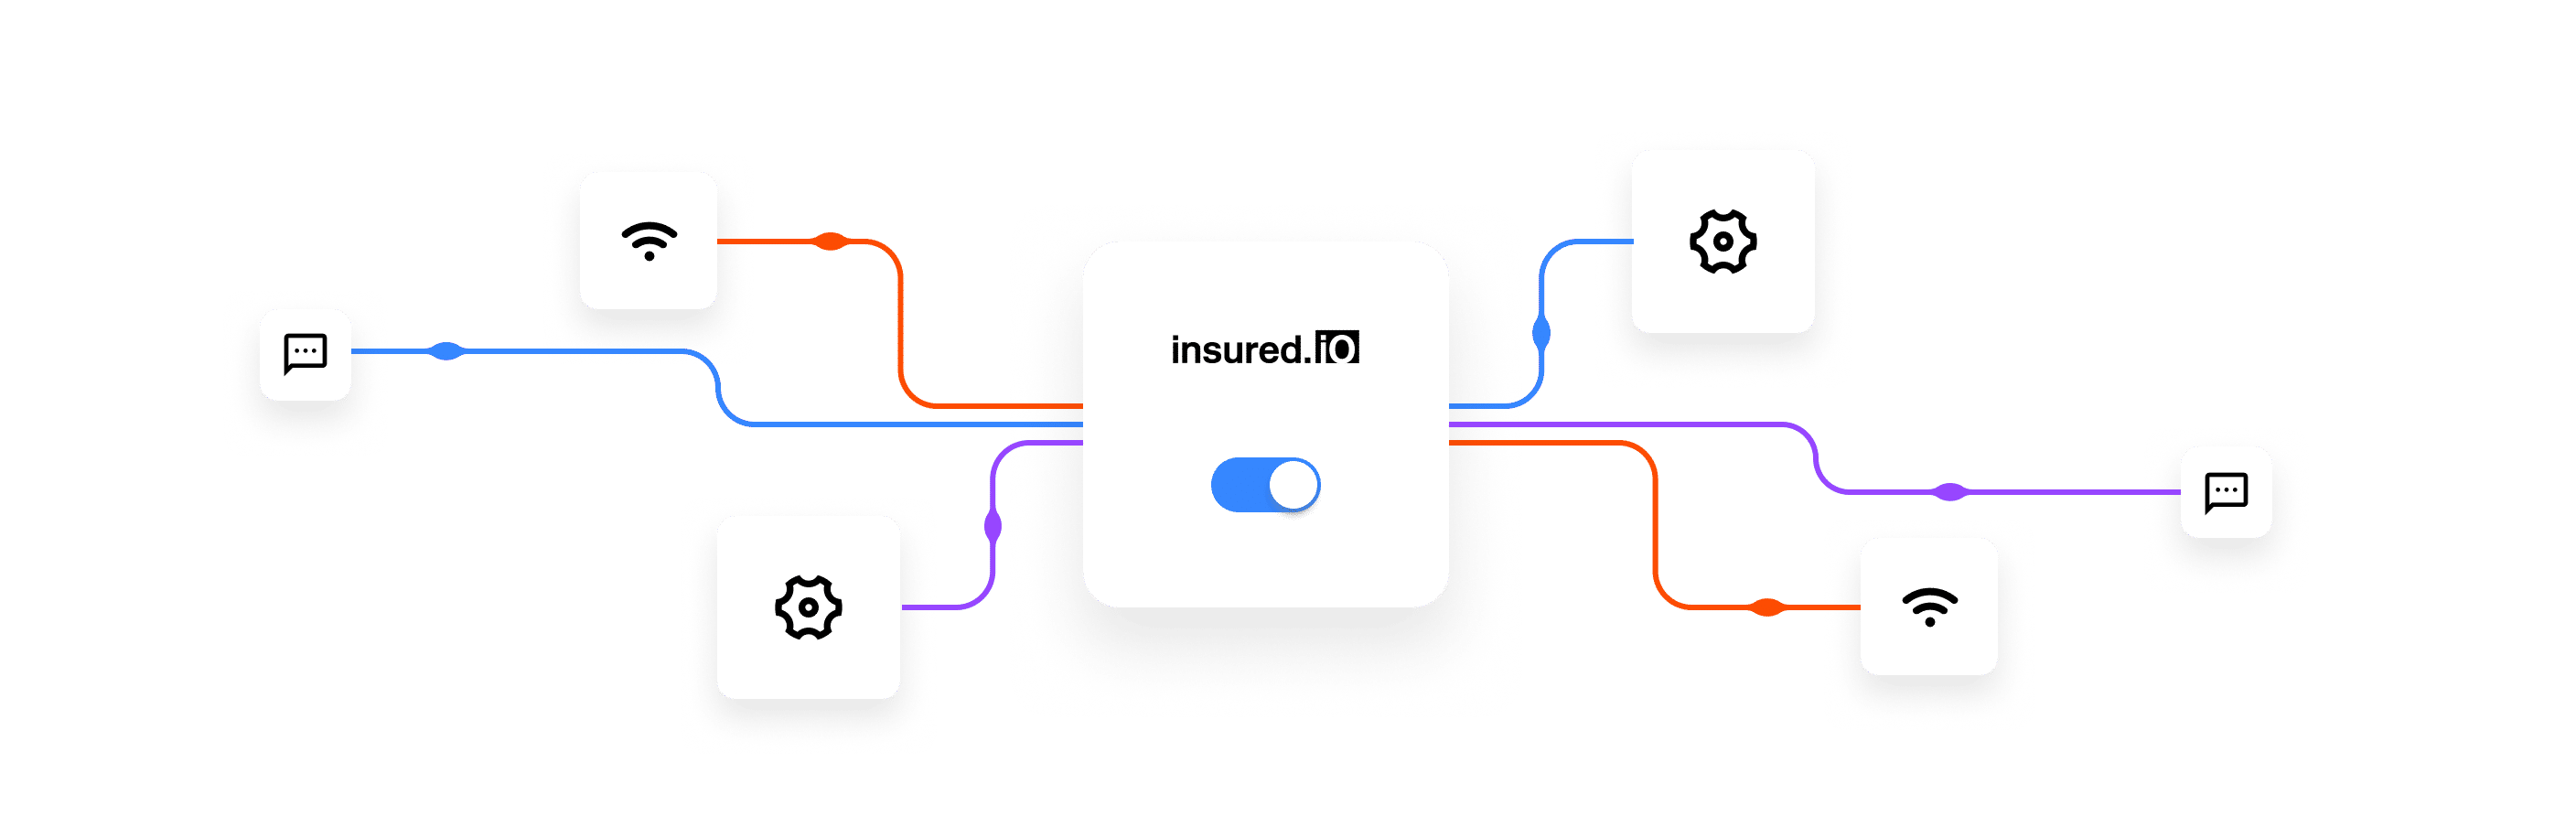 Insured.io unified system